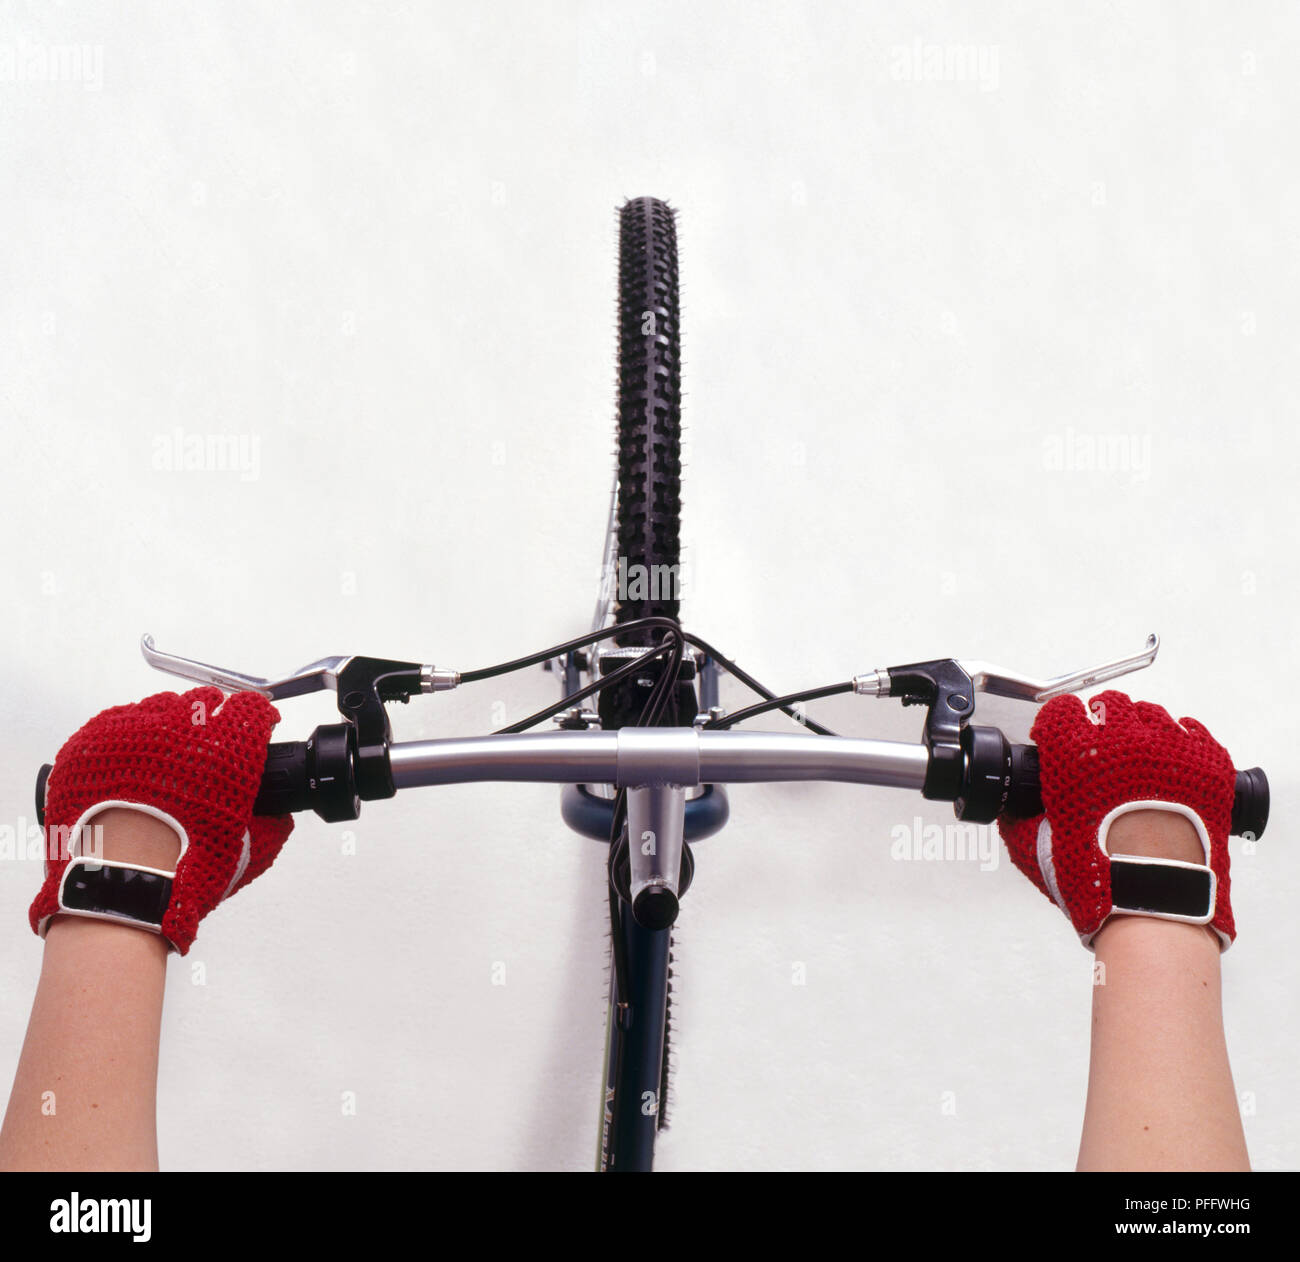 Hands wearing cycling gloves holding the handle bars on a bike, close-up, view from above Stock Photo